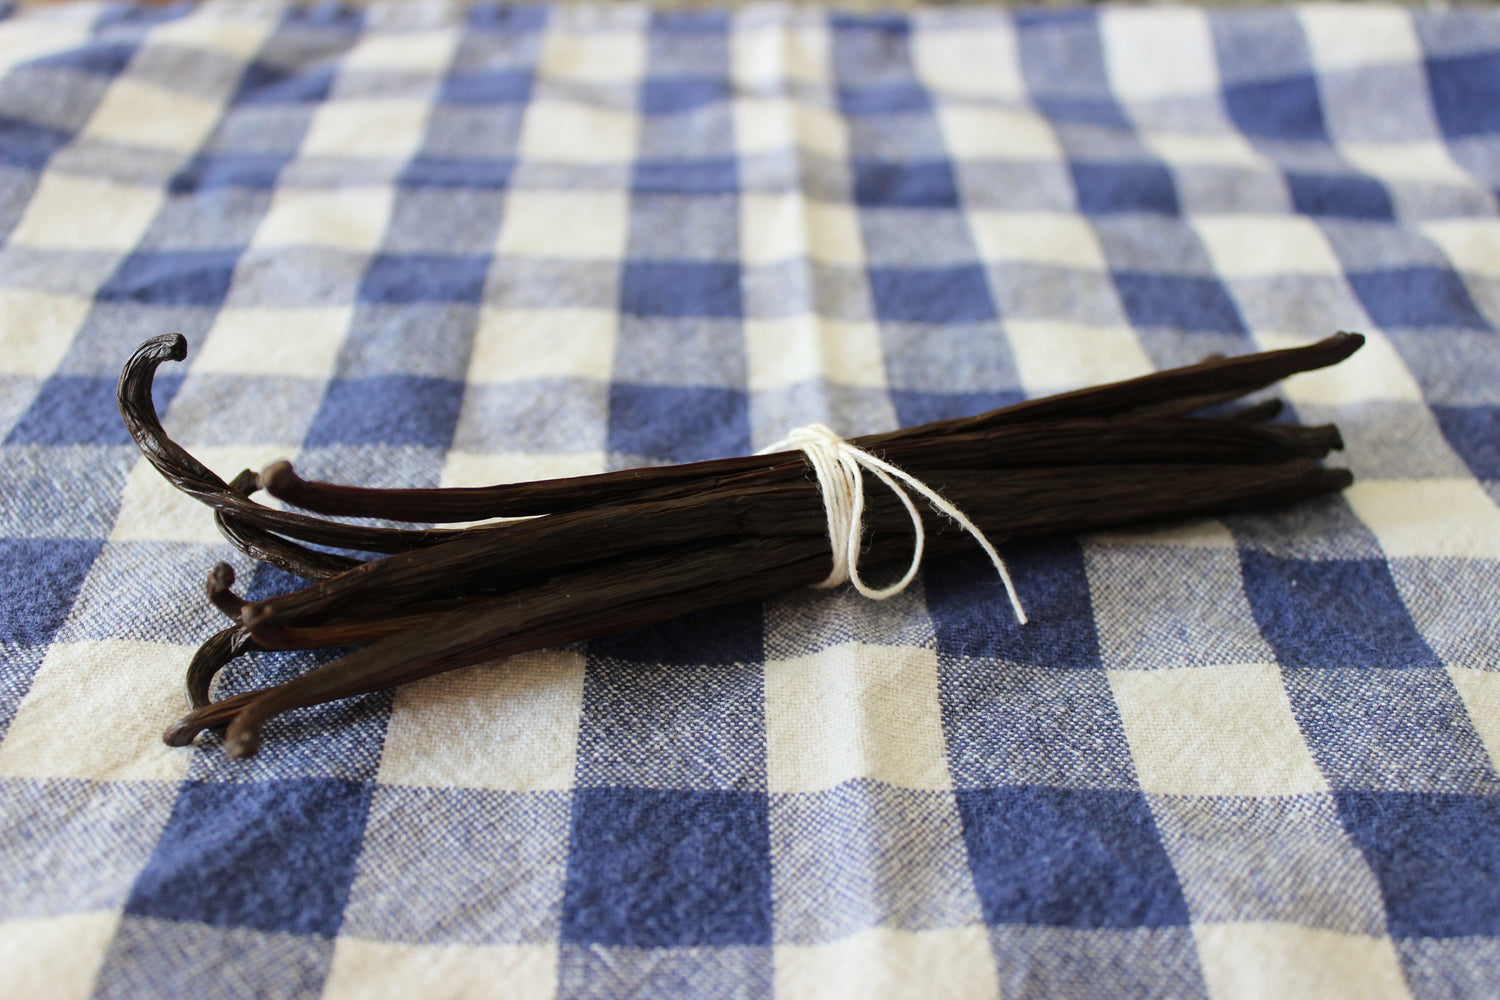 Bundle of Vanilla Beans tied together with string on blue and white checkered tablecloth.